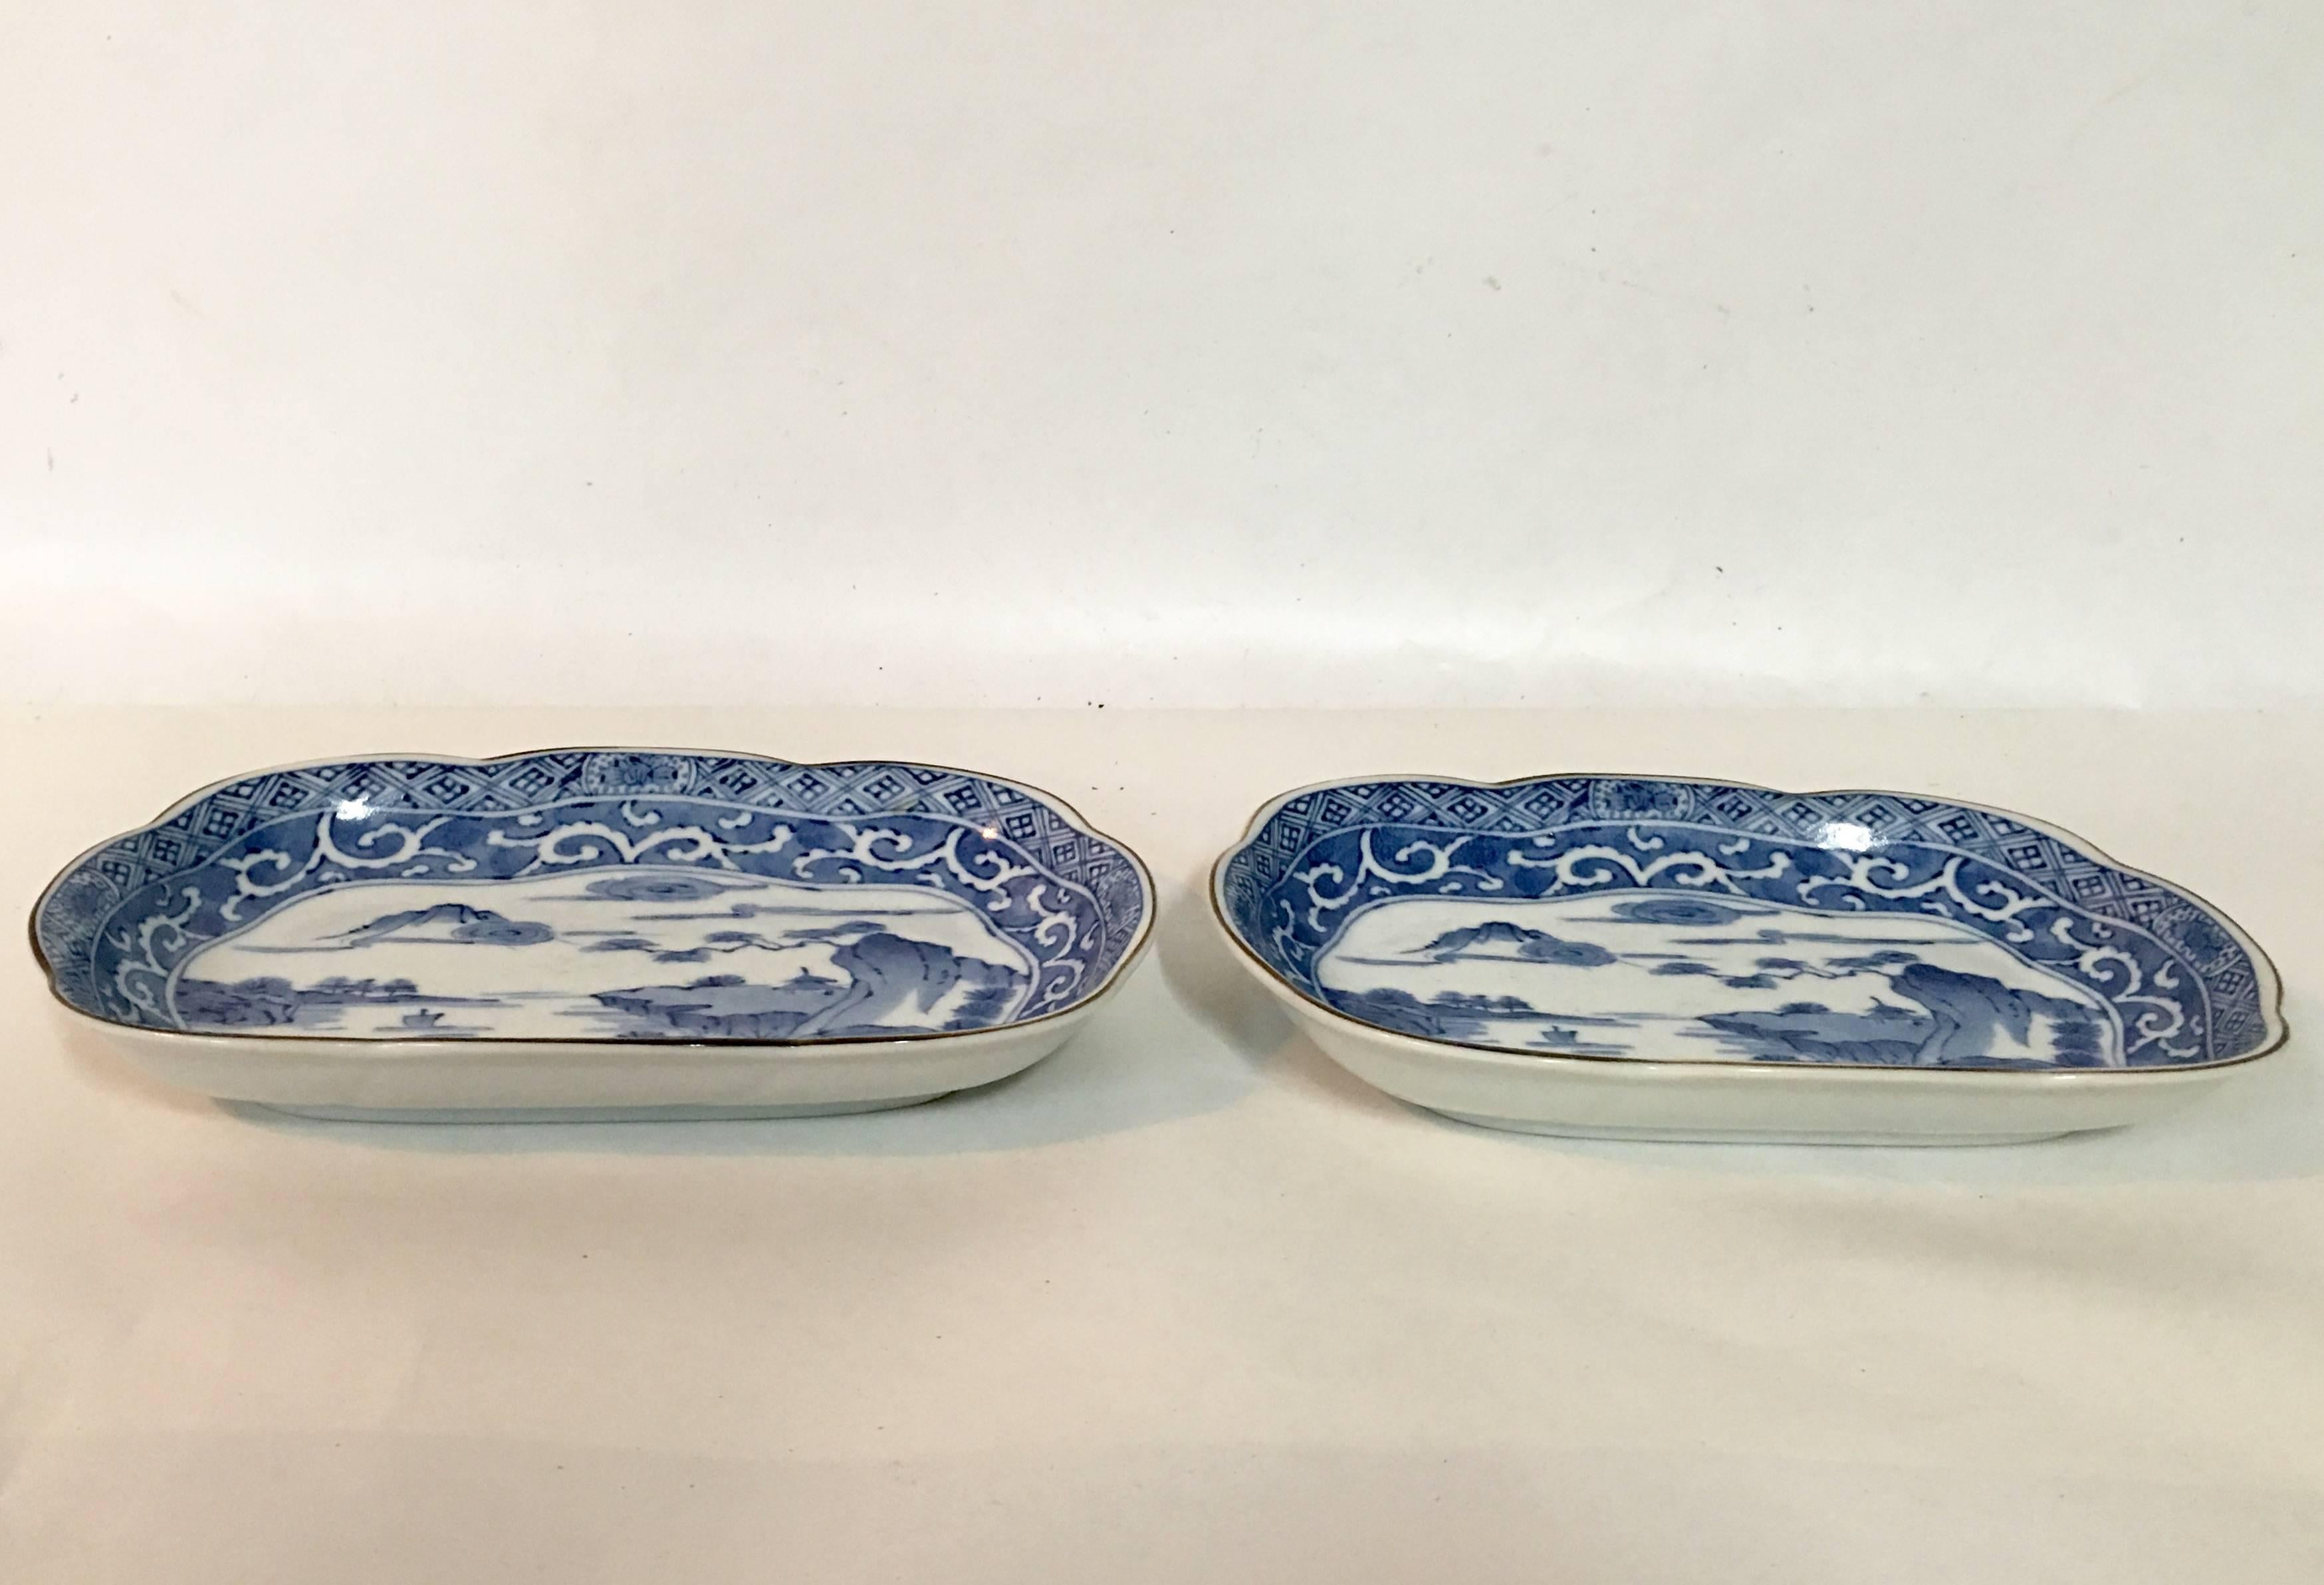 Pair of blue and white Japanese hand-painted gold rim scenic motif platters/trays. Each piece is artist signed on the underside.